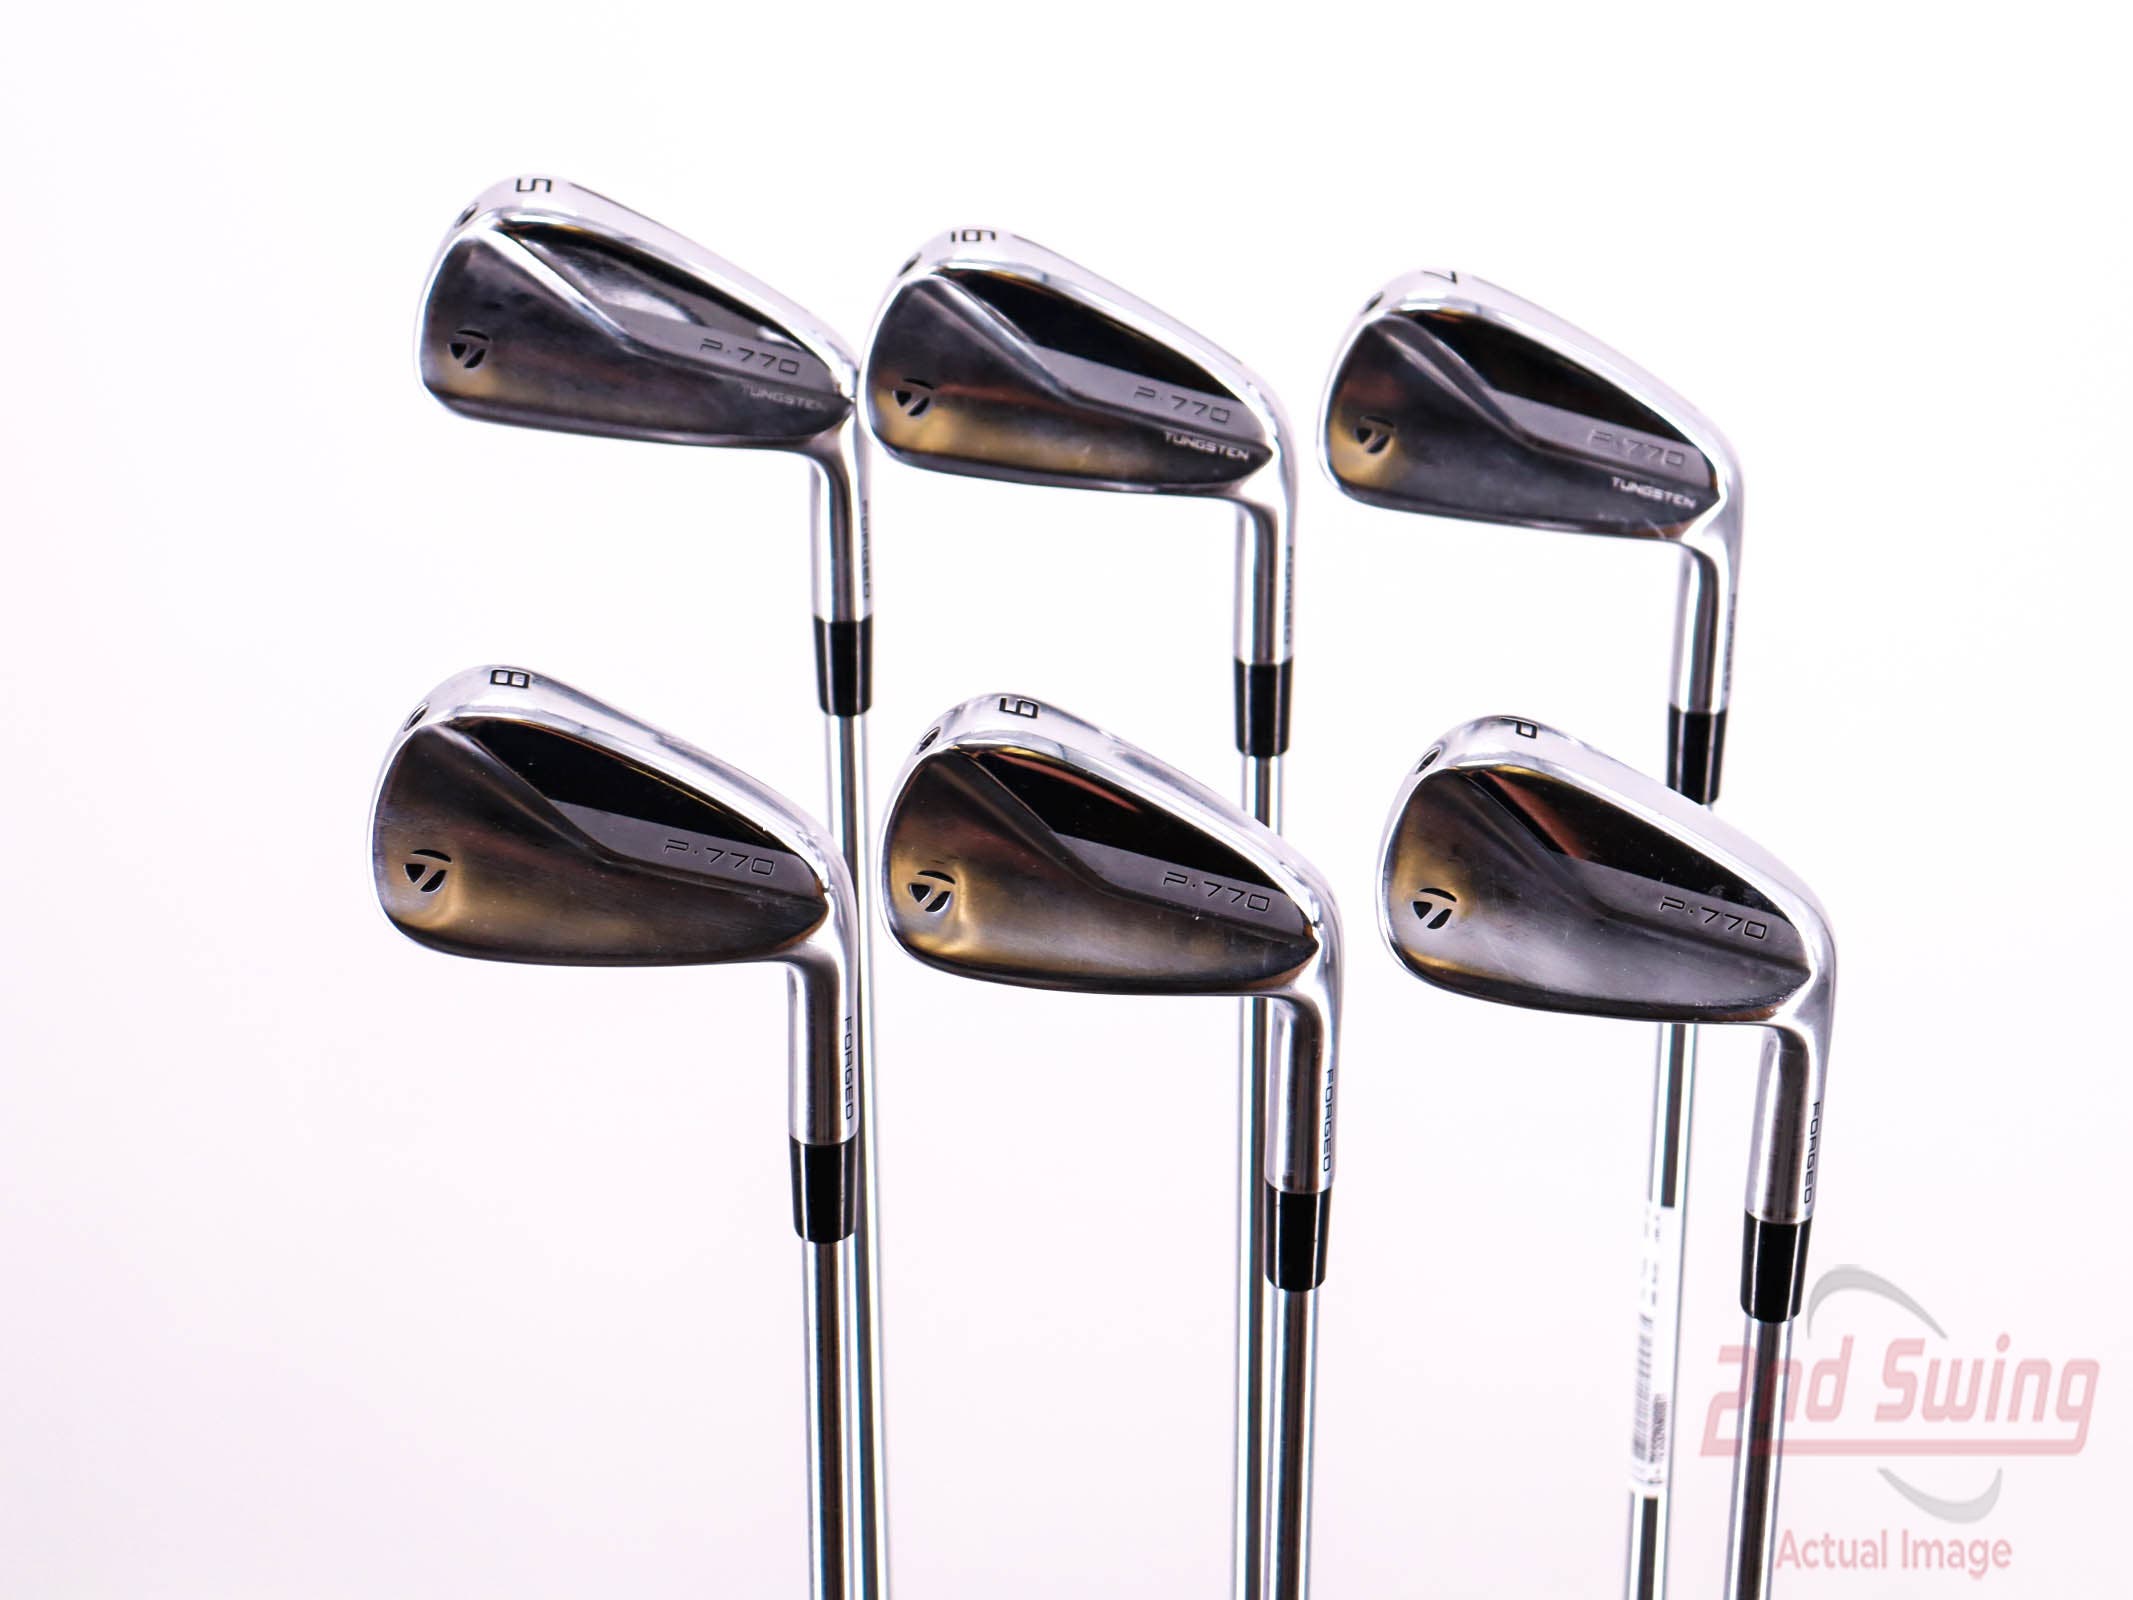 taylormade iron fitting online